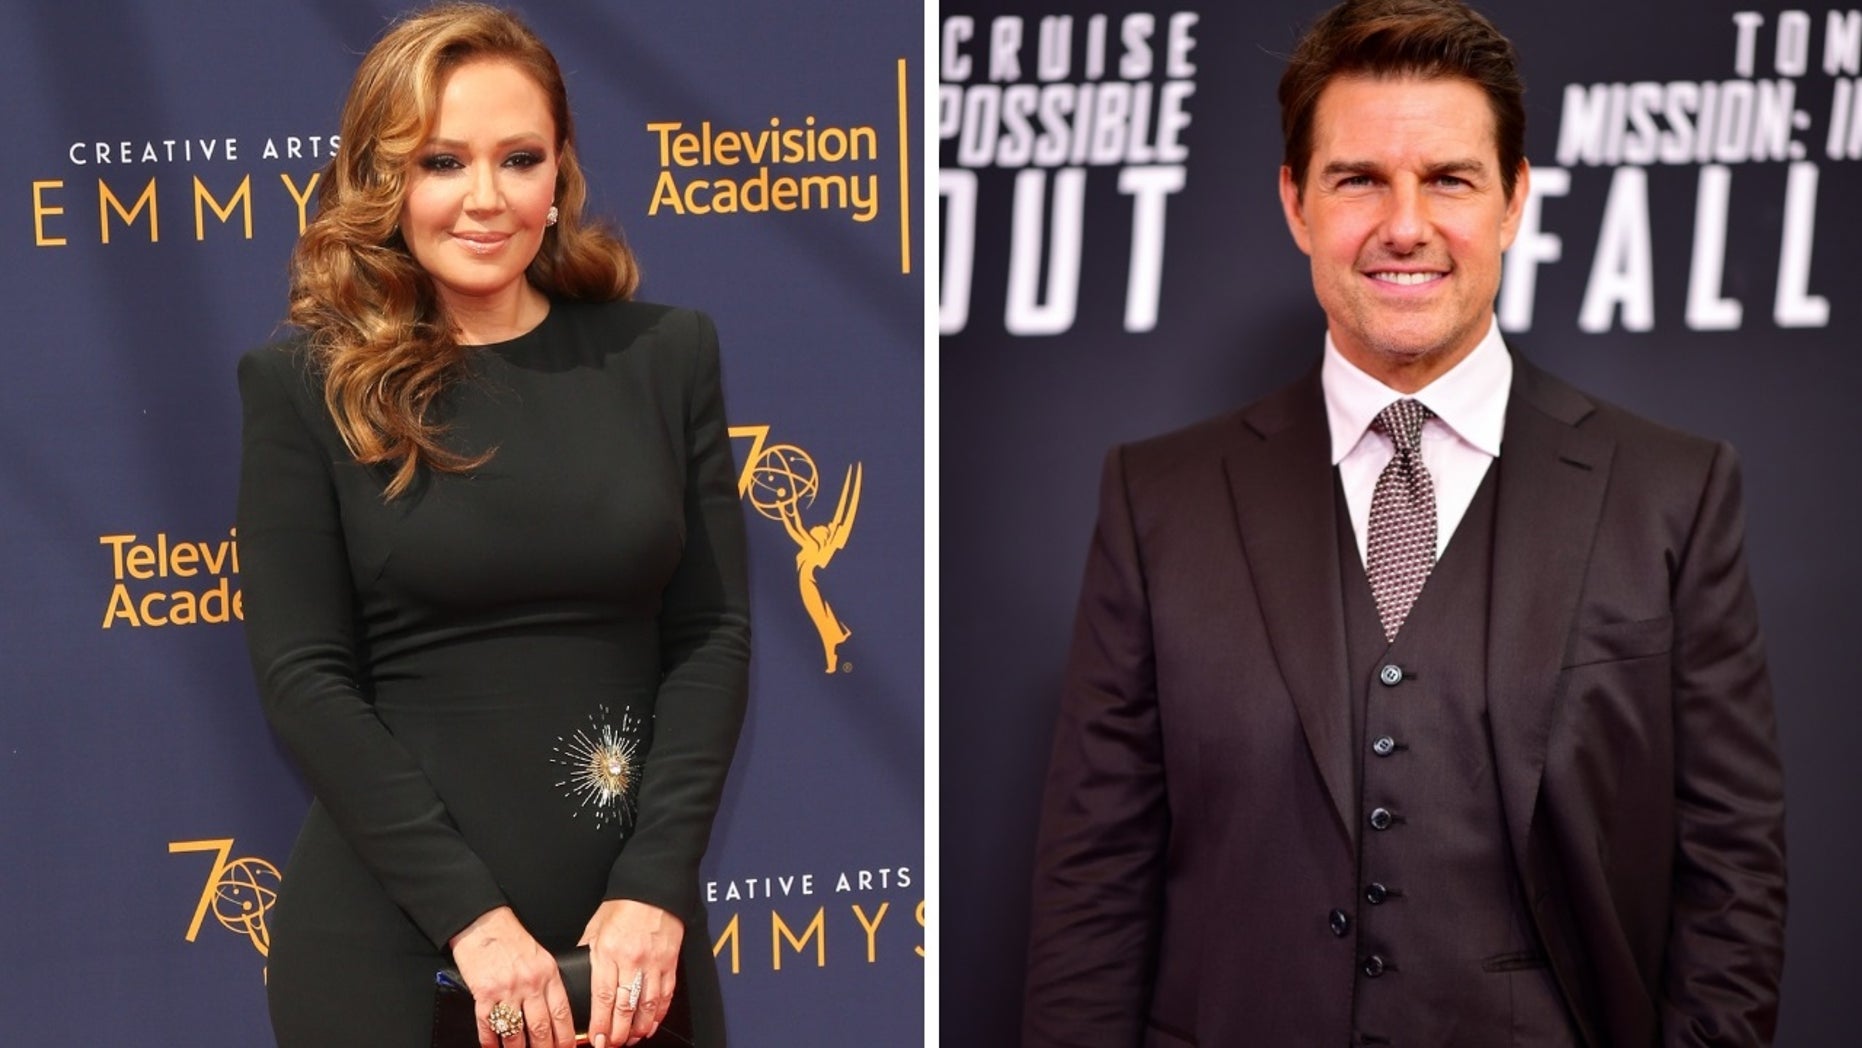 Leah Remini claims that Tom Cruise was aware of the abuses committed within the Church of Scientology.